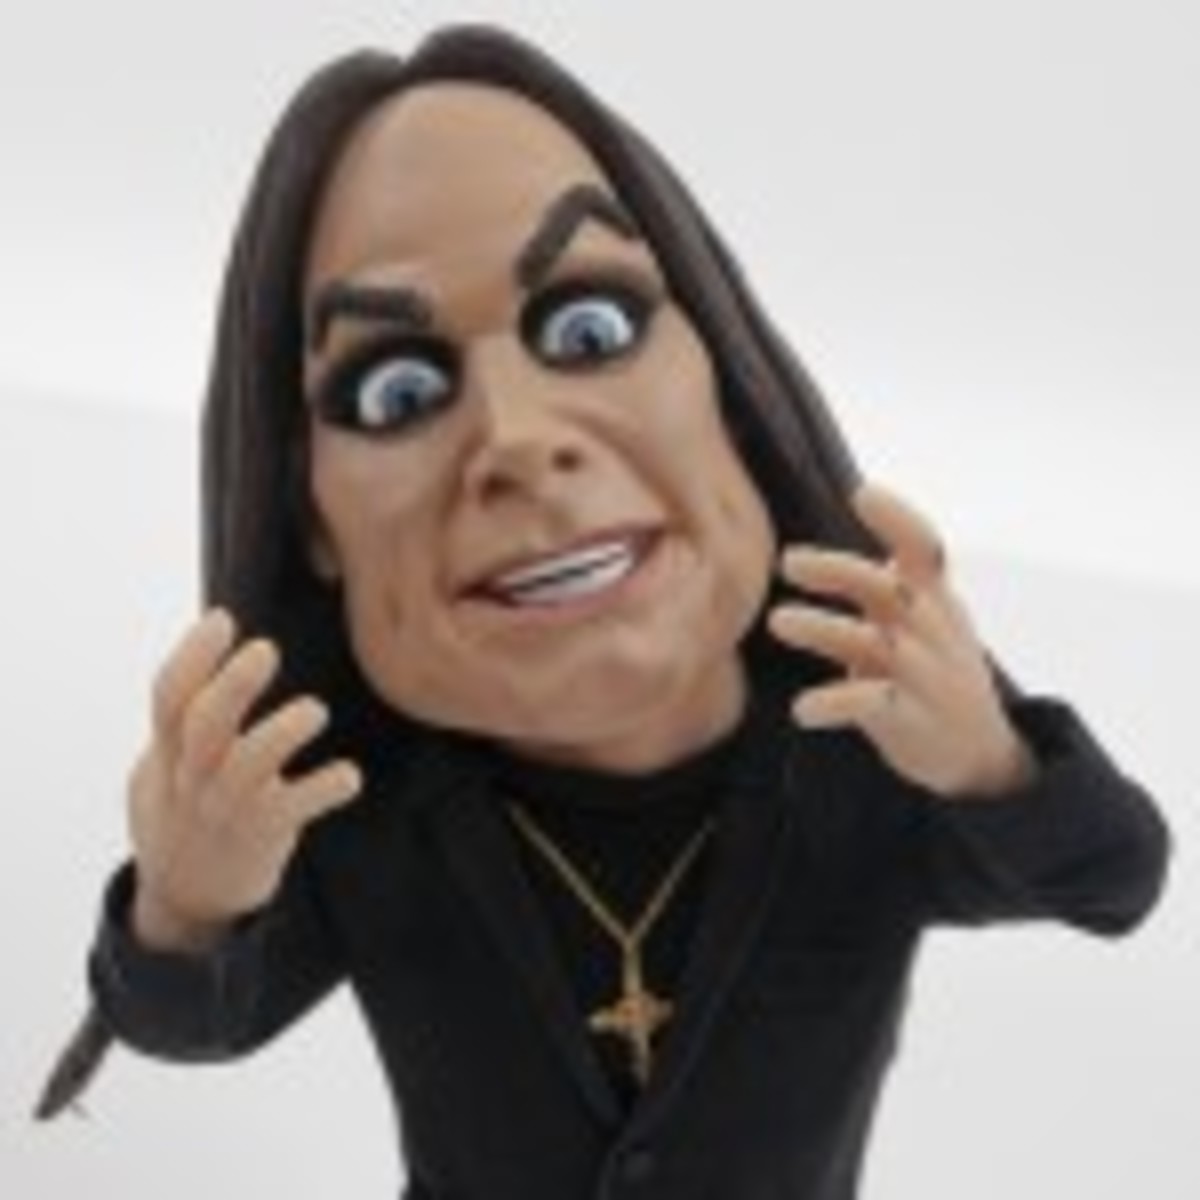 The clay-animation version of Ozzy Osbourne that appears in a new Brisk Iced Tea Web film